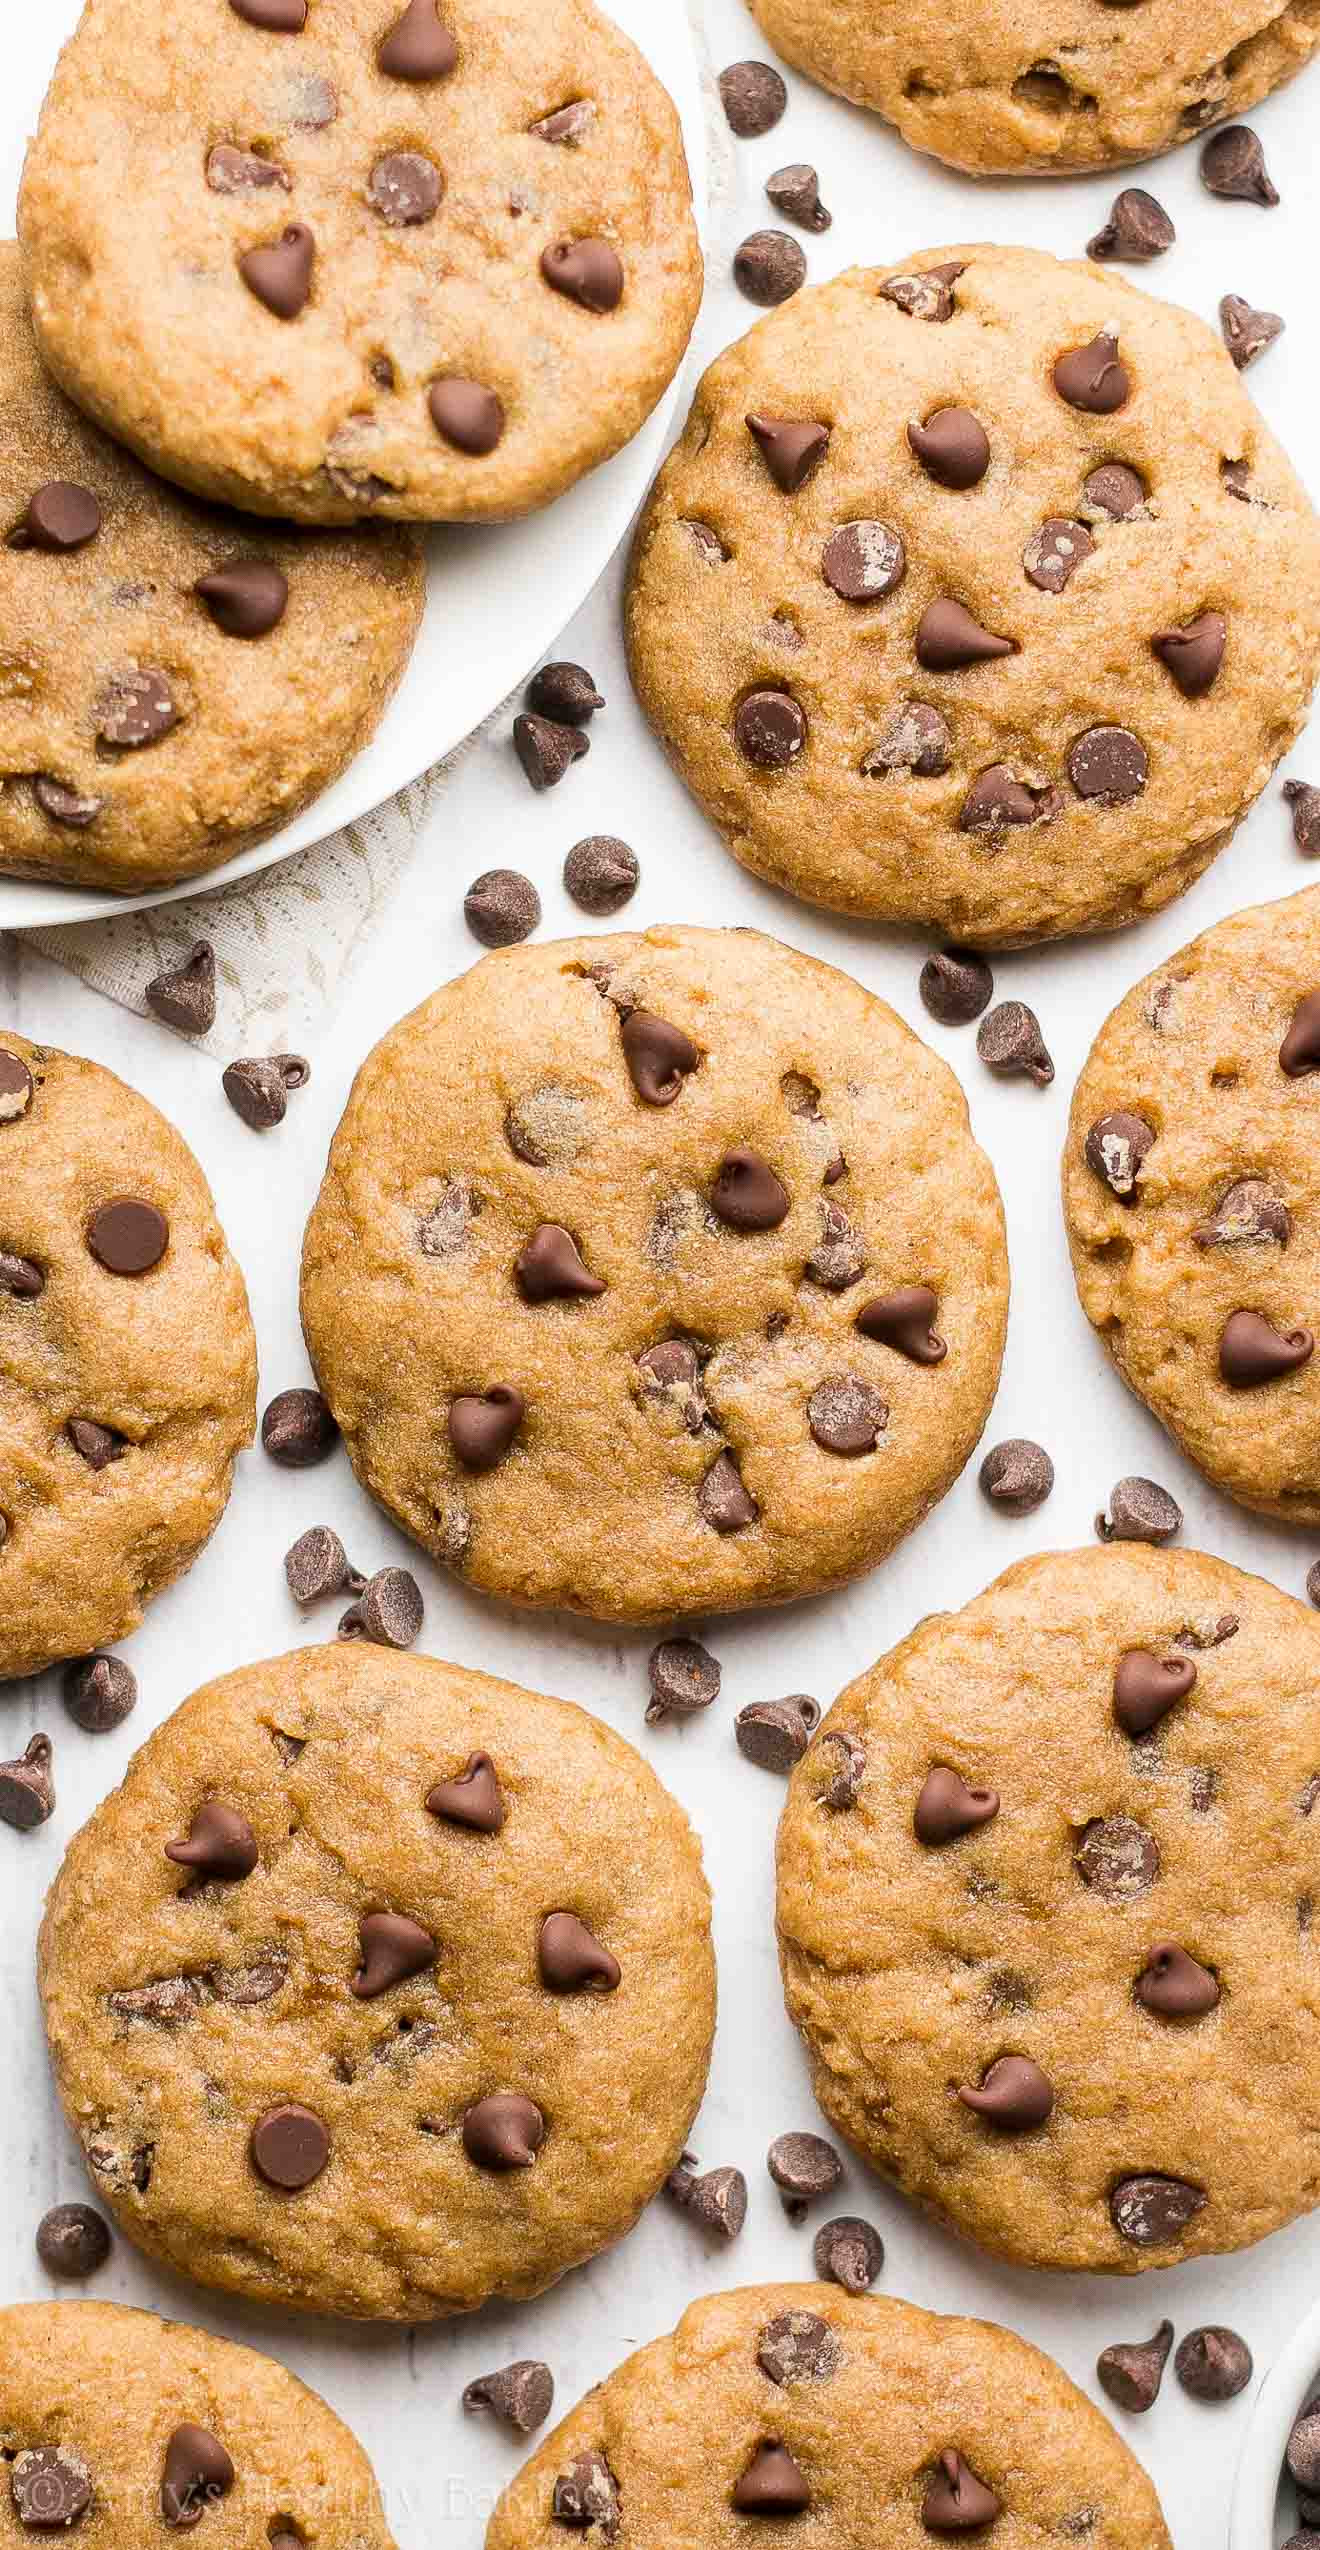 Chocolate Chocolate Chip Cookies
 Healthy Banana Chocolate Chip Cookies Recipe Video